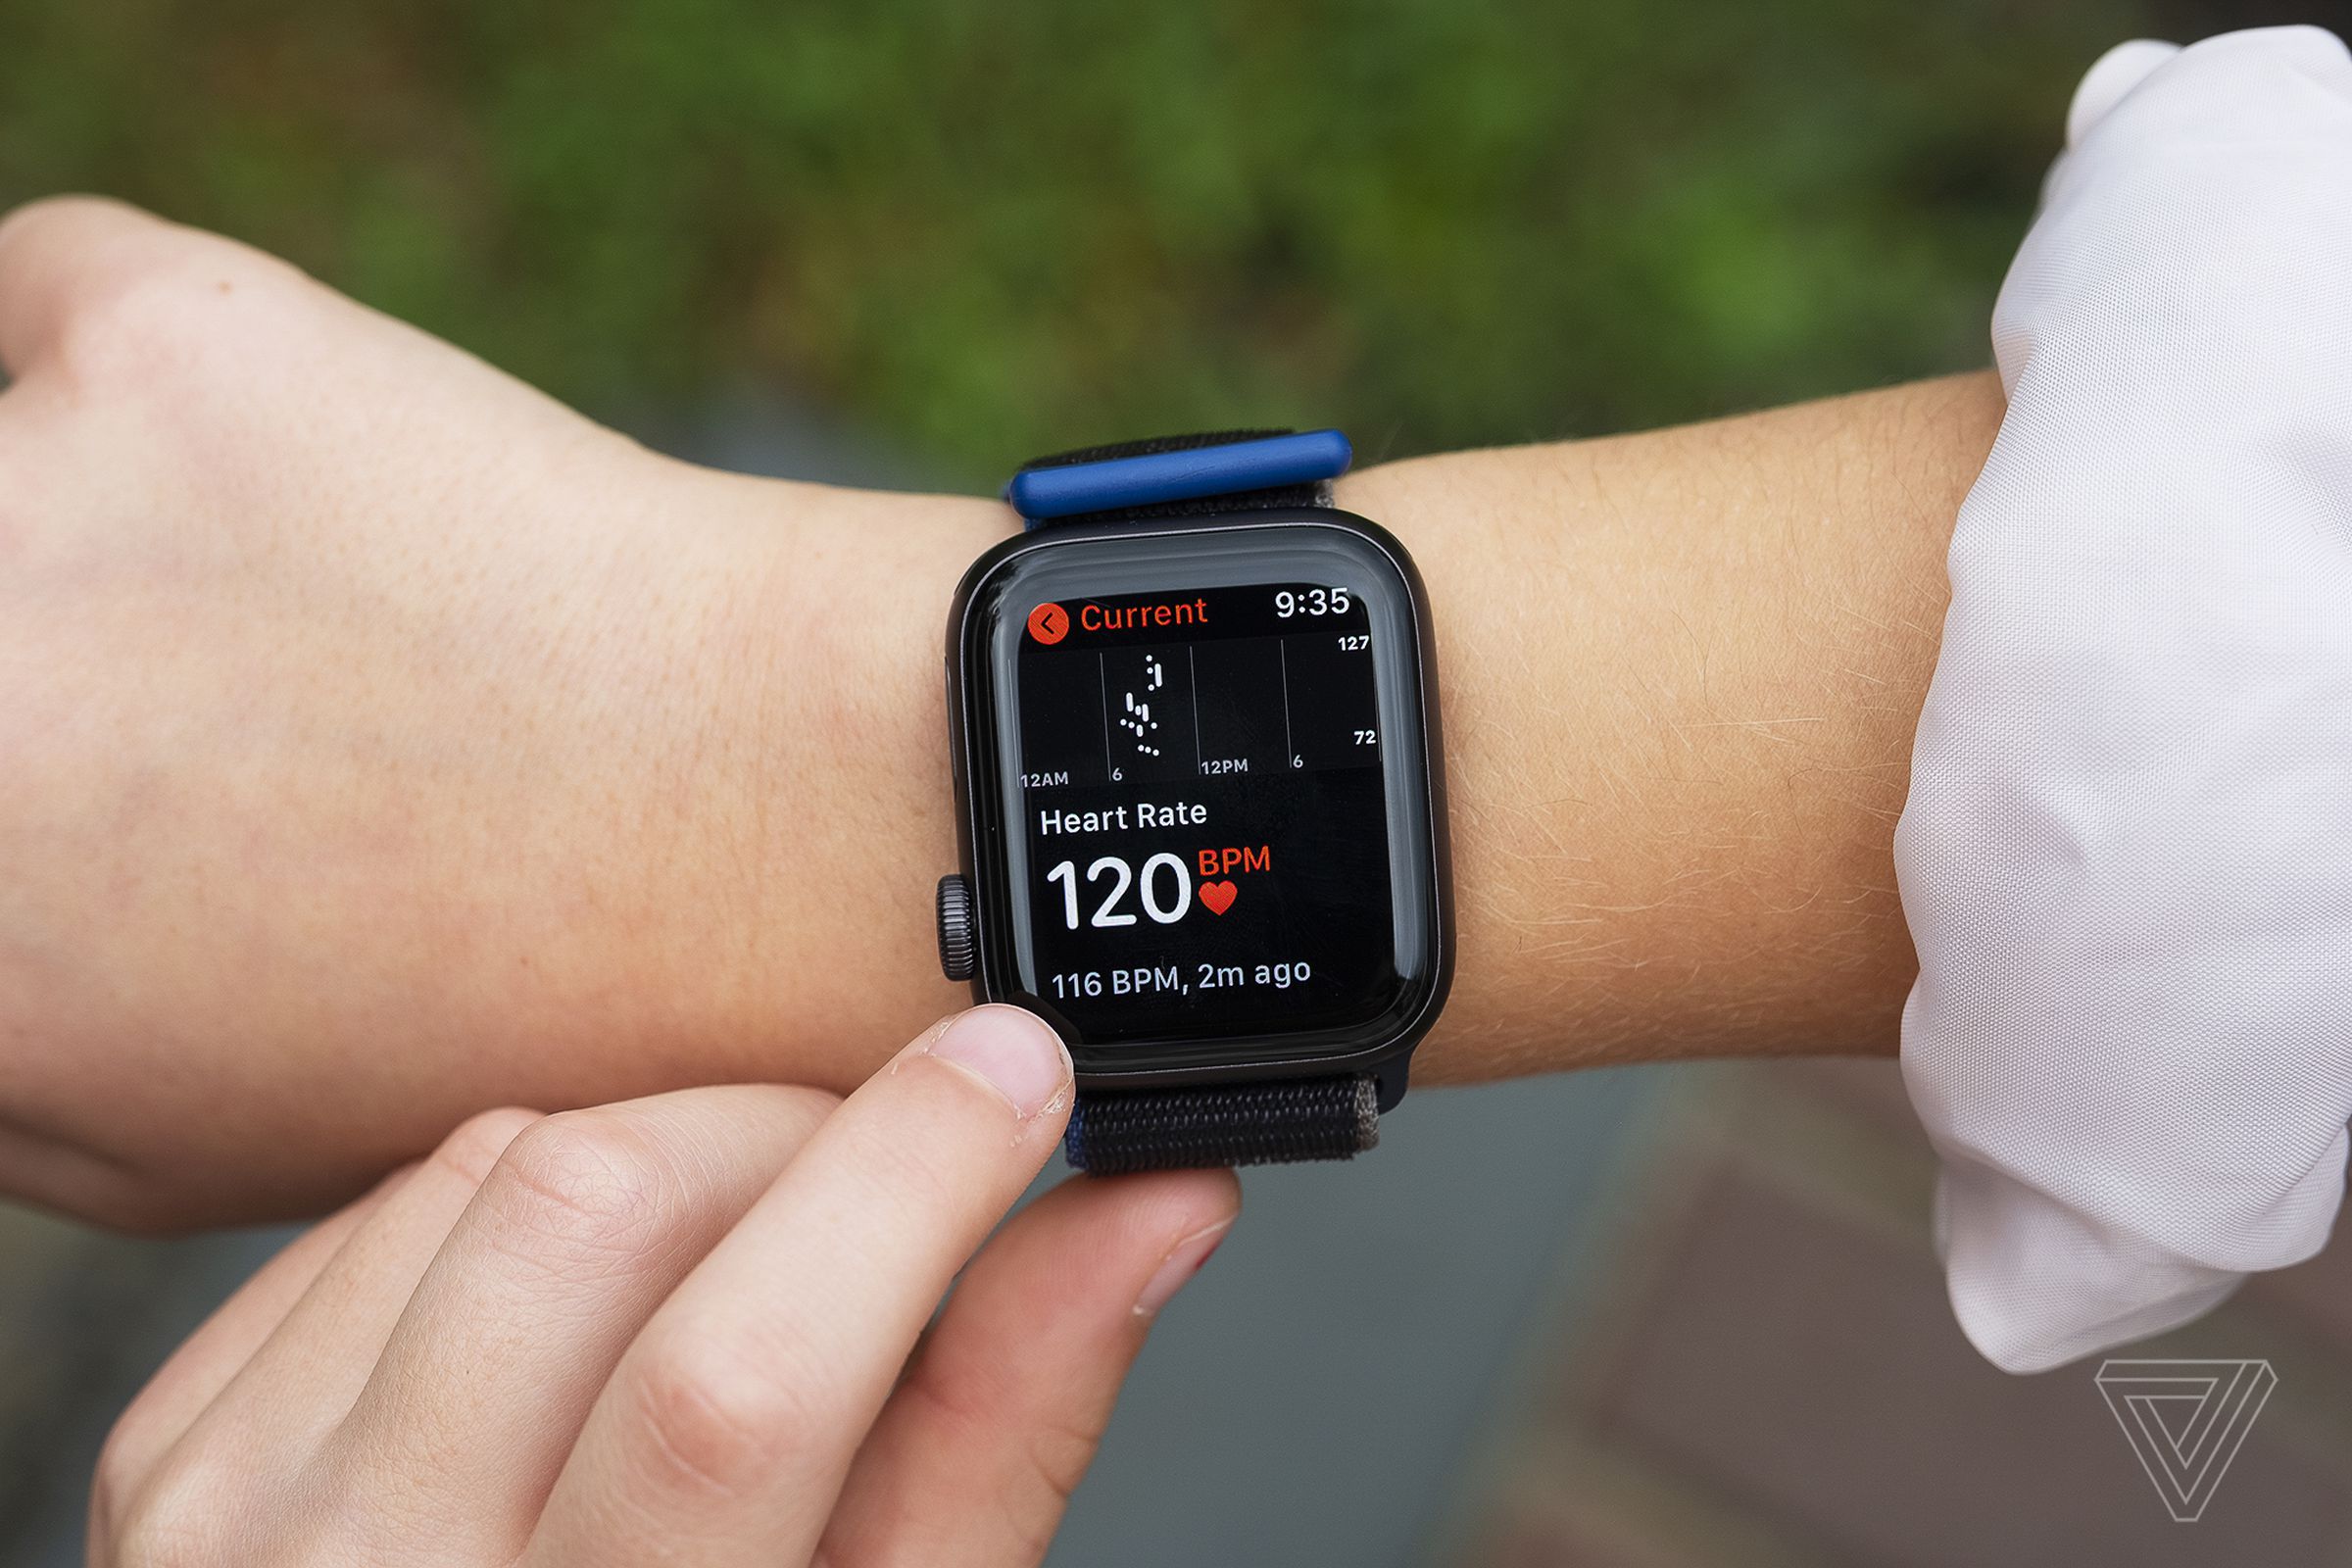 The Apple Watch has several heart-related health features.